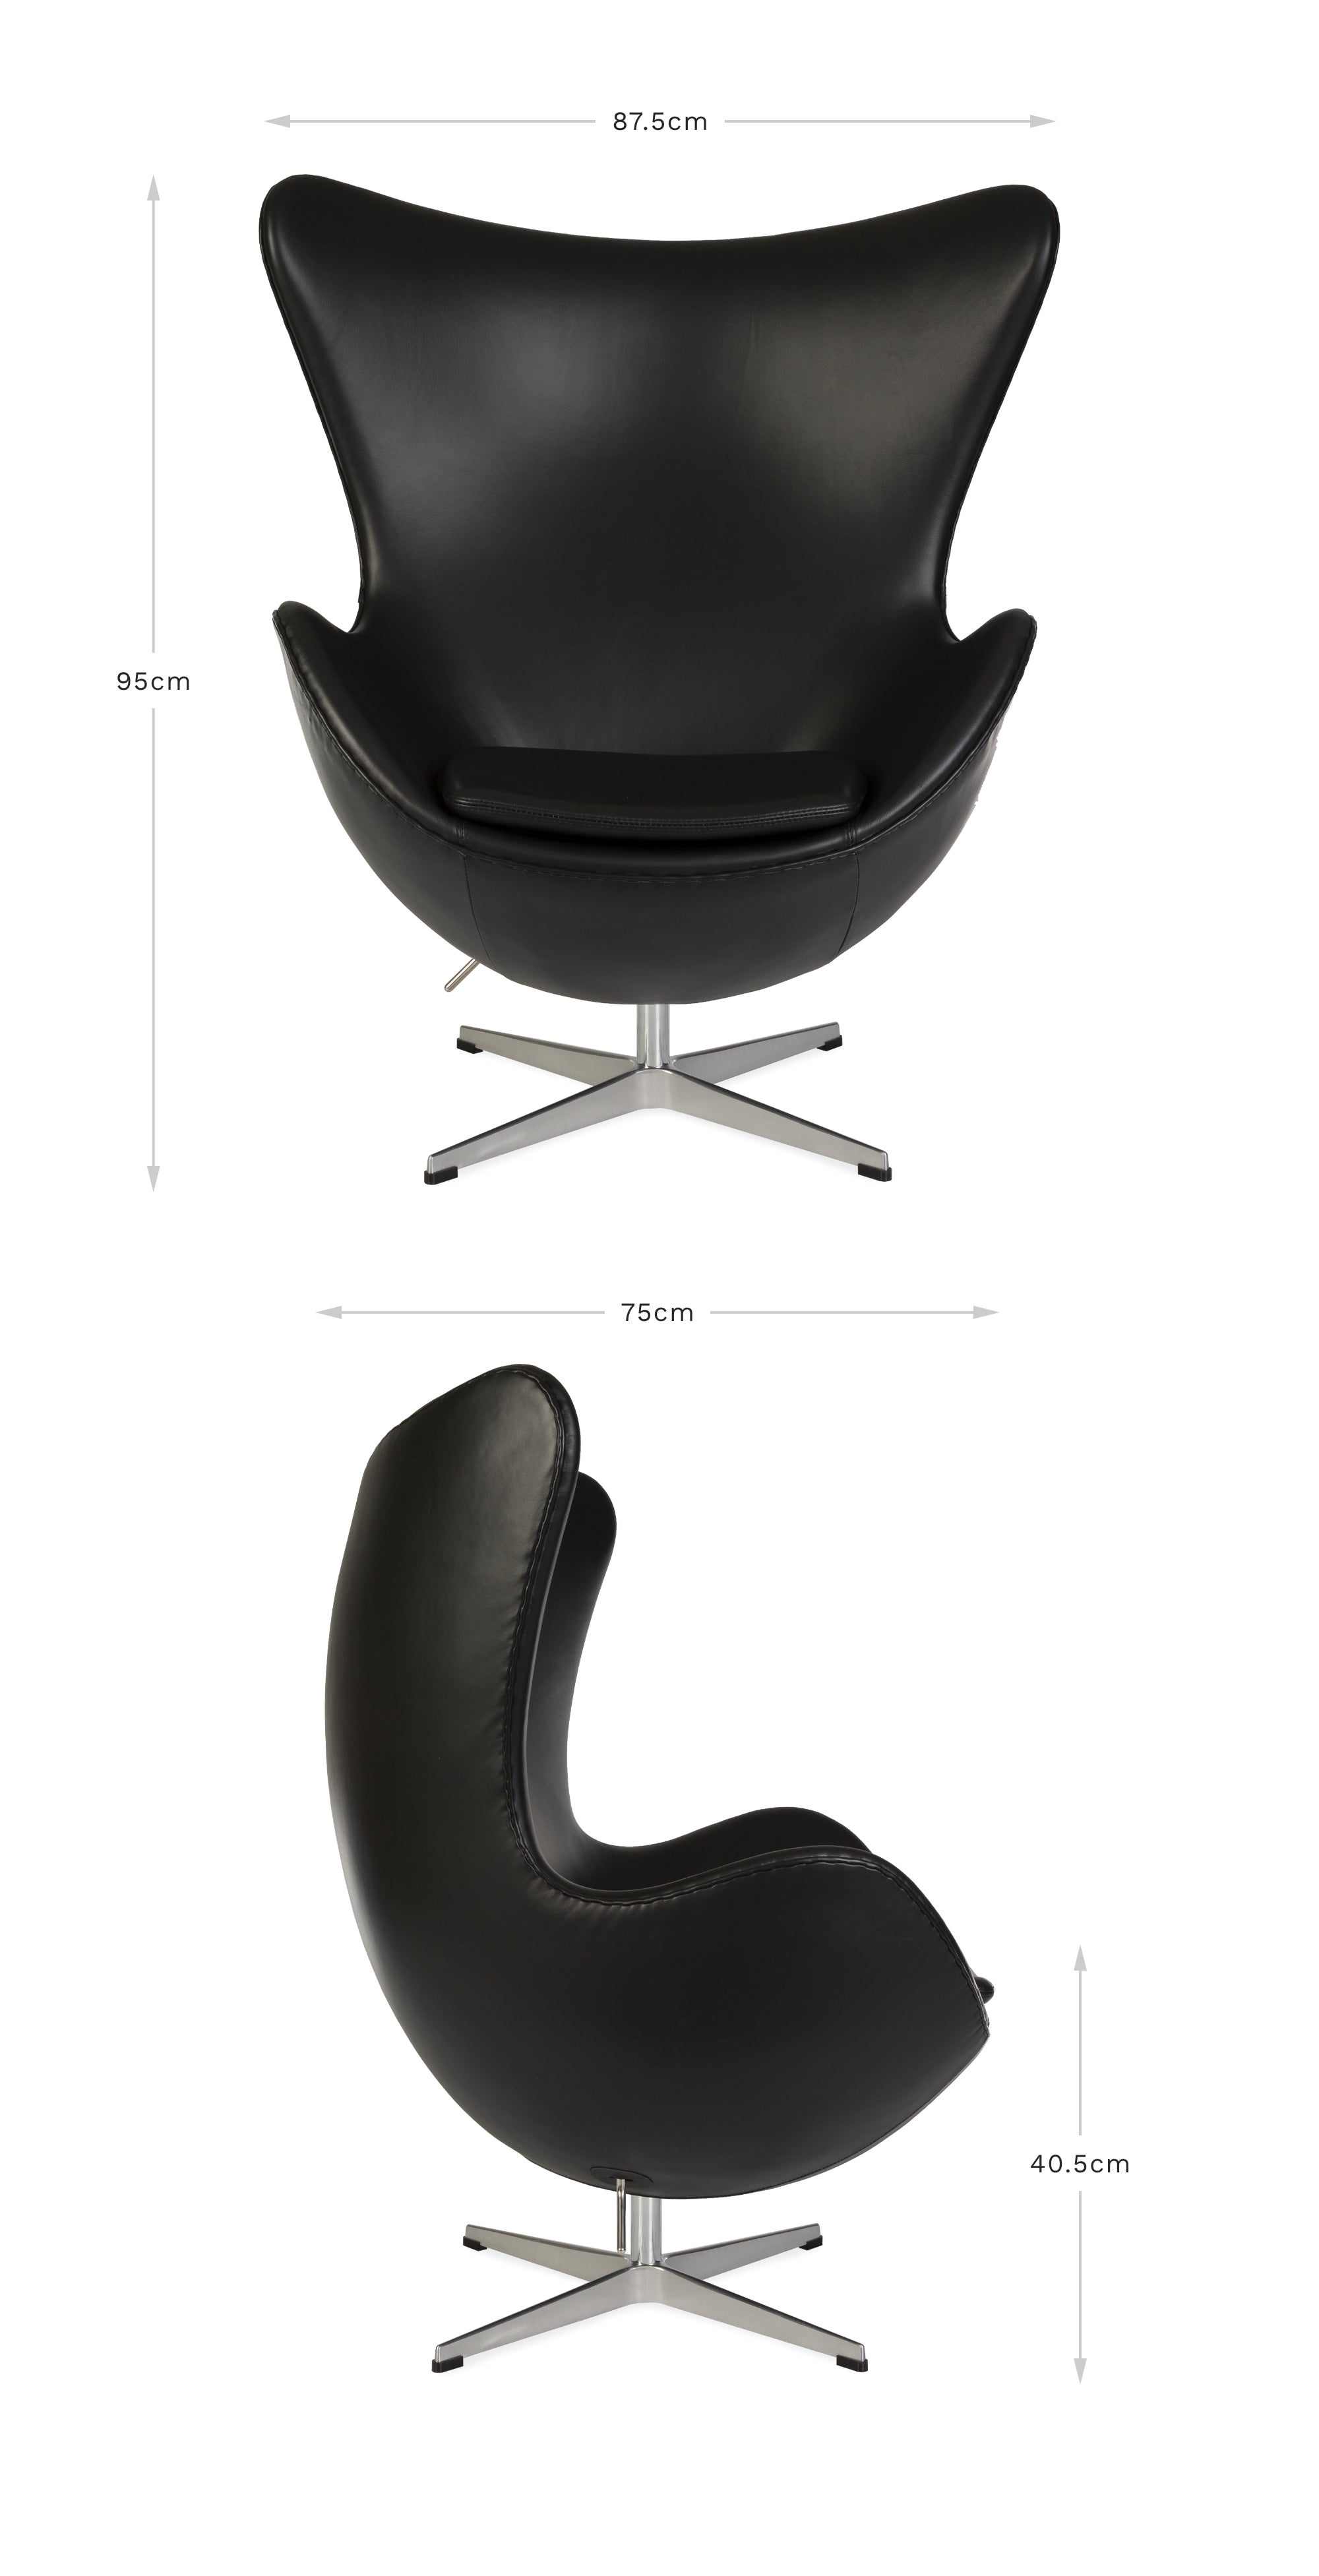 View of front and side of the black leather Jacobsen Egg Chair on a white background displaying the dimensions